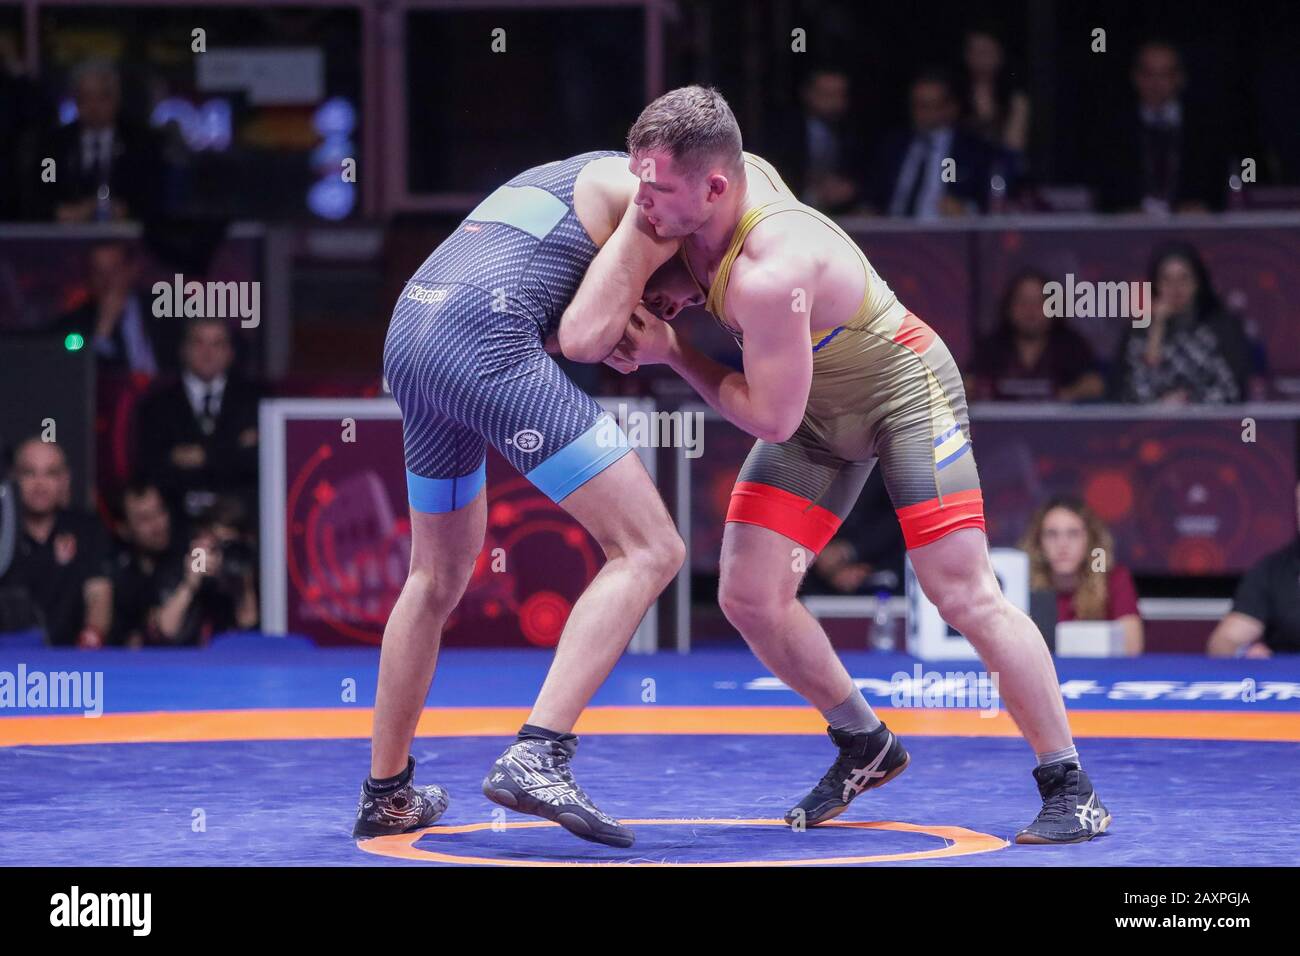 Roma, Italy. 12th Feb, 2020. b . kourinnoi (swe) category gr 82 kg during Wrestling Greco-Roman European Senior Championship, Wrestling in Roma, Italy, February 12 2020 Credit: Independent Photo Agency/Alamy Live News Stock Photo